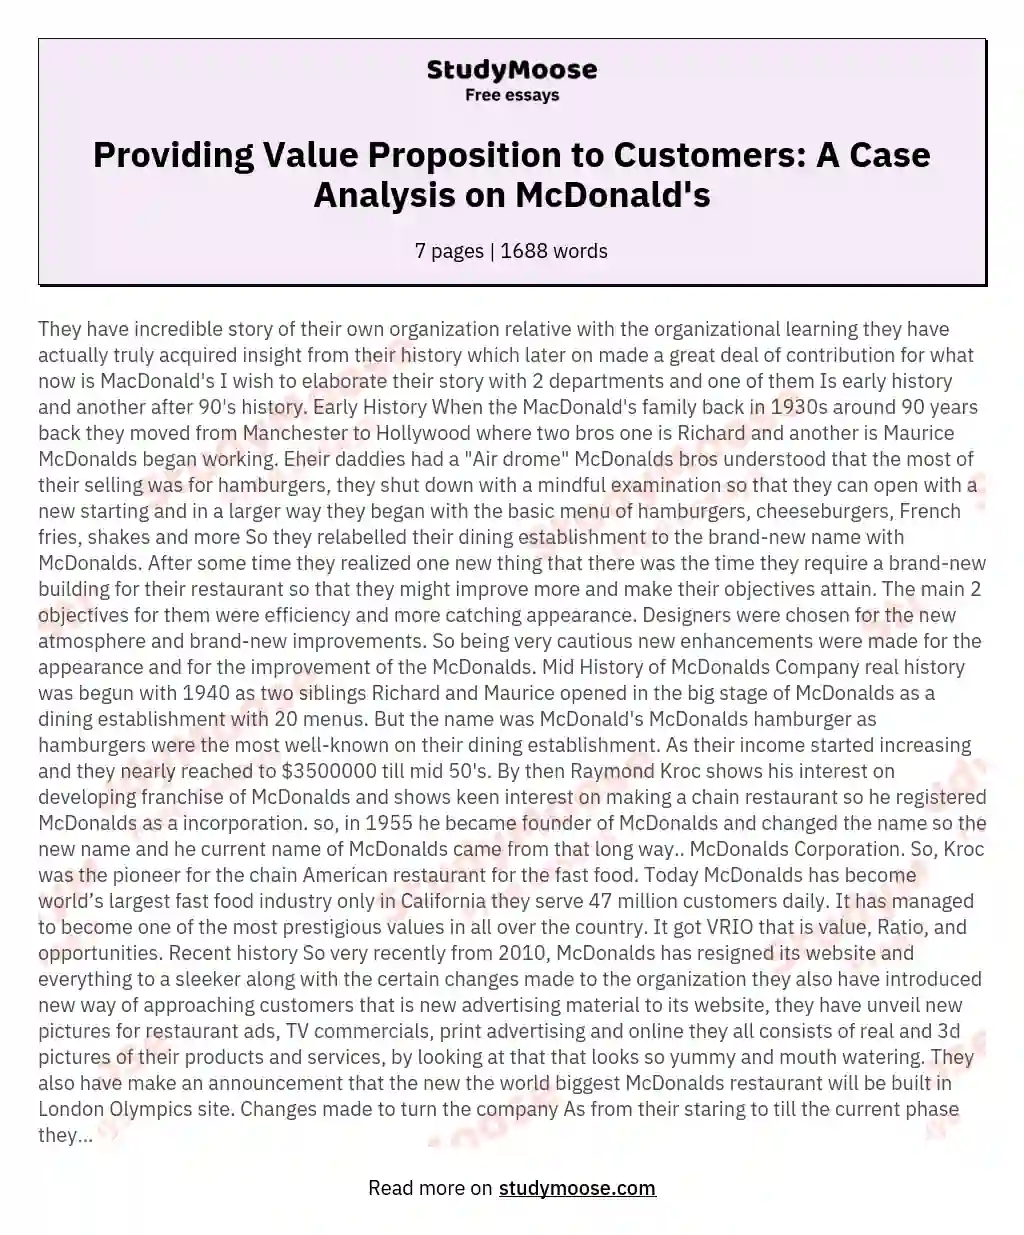 Providing Value Proposition to Customers: A Case Analysis on McDonald's essay